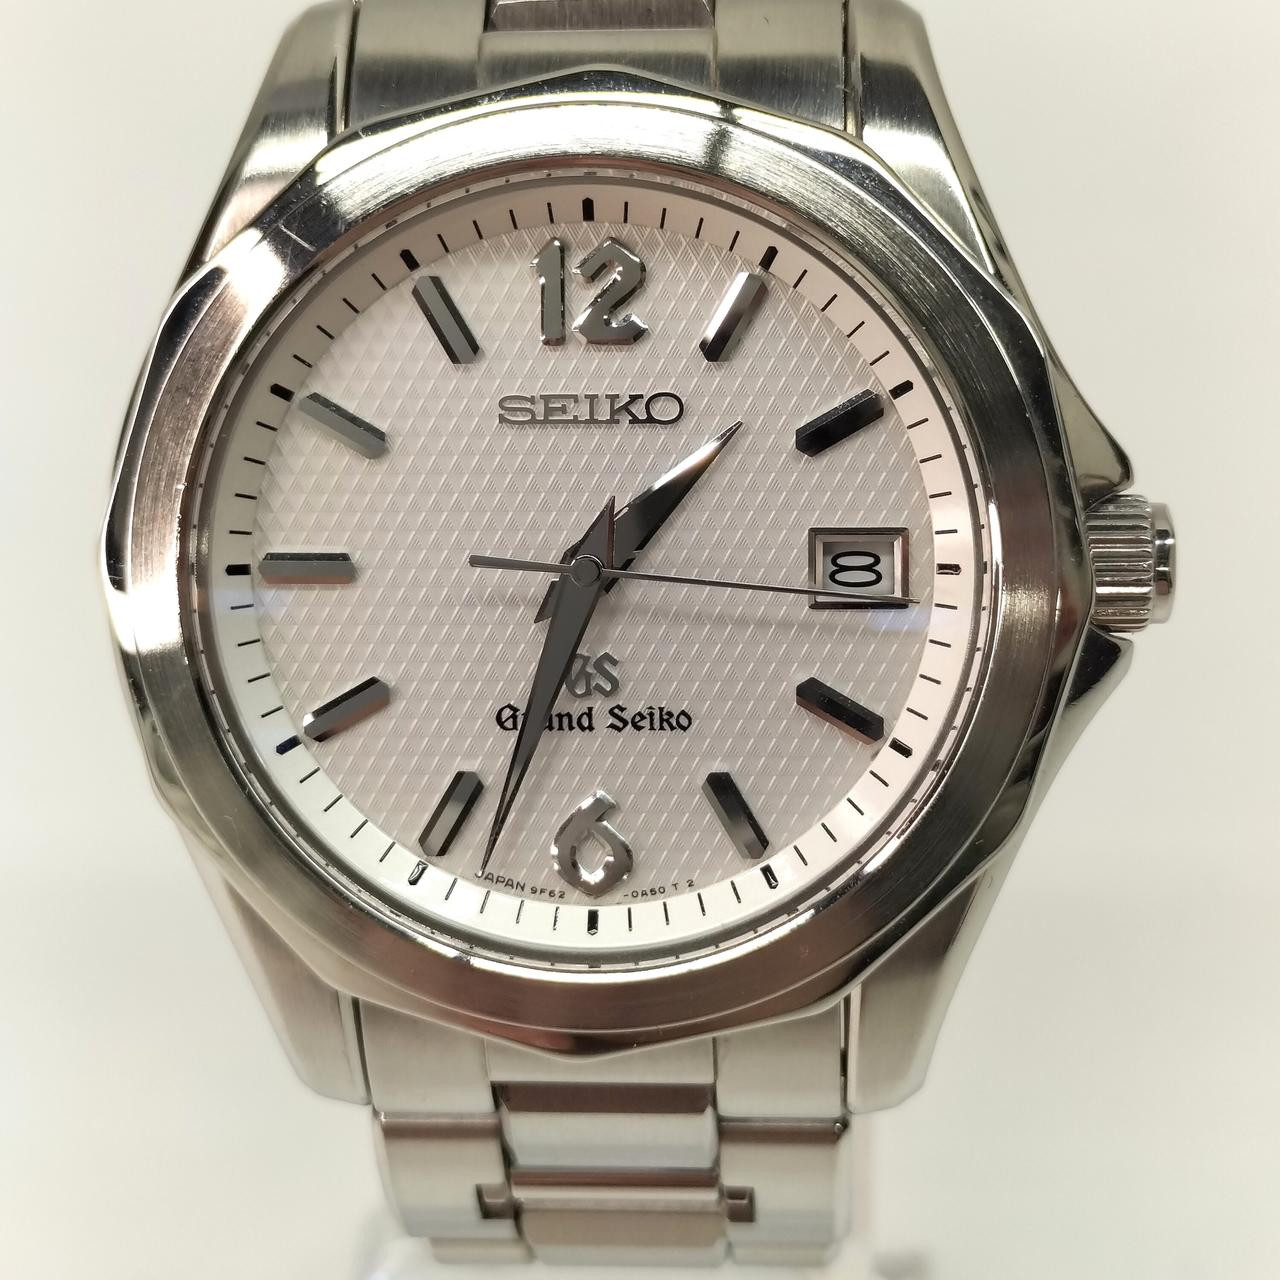 Seiko Grand Seiko 9F62-0A60 Date Stainless Steel White Quartz Mens Watch -  Japan Pre-owned Vintage